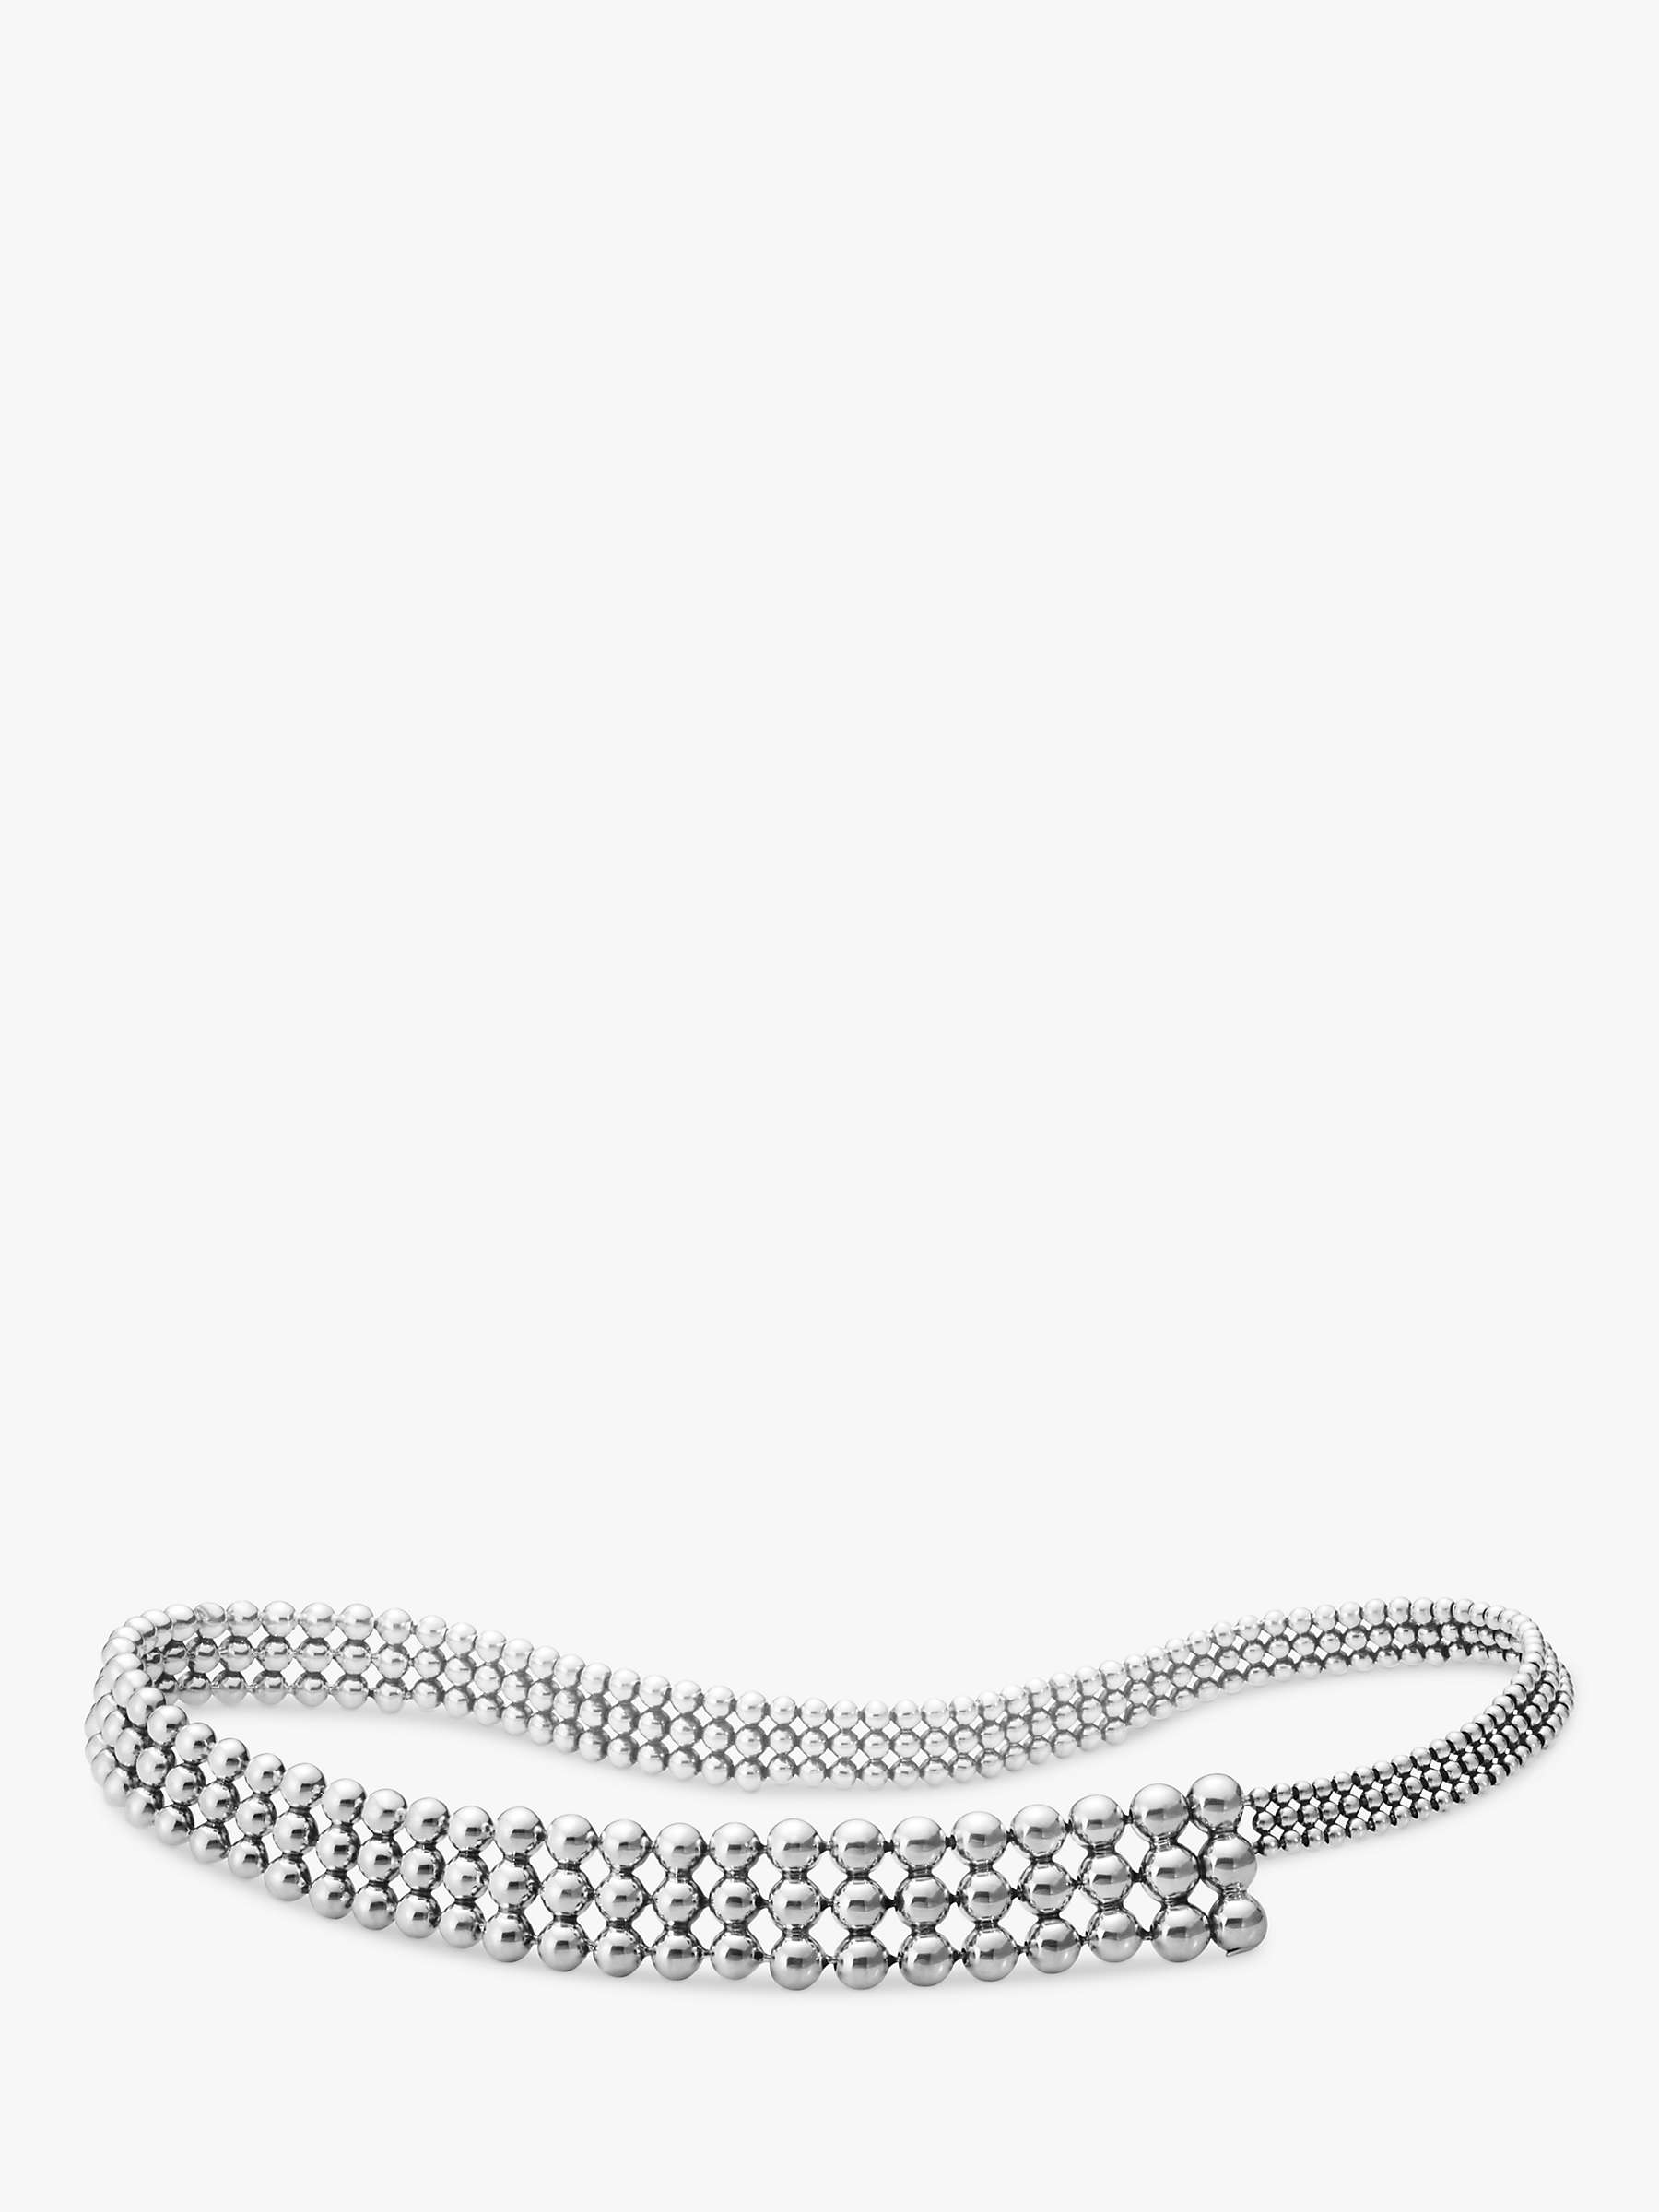 Buy Georg Jensen Moonlight Grapes Chain Necklace, Silver Online at johnlewis.com